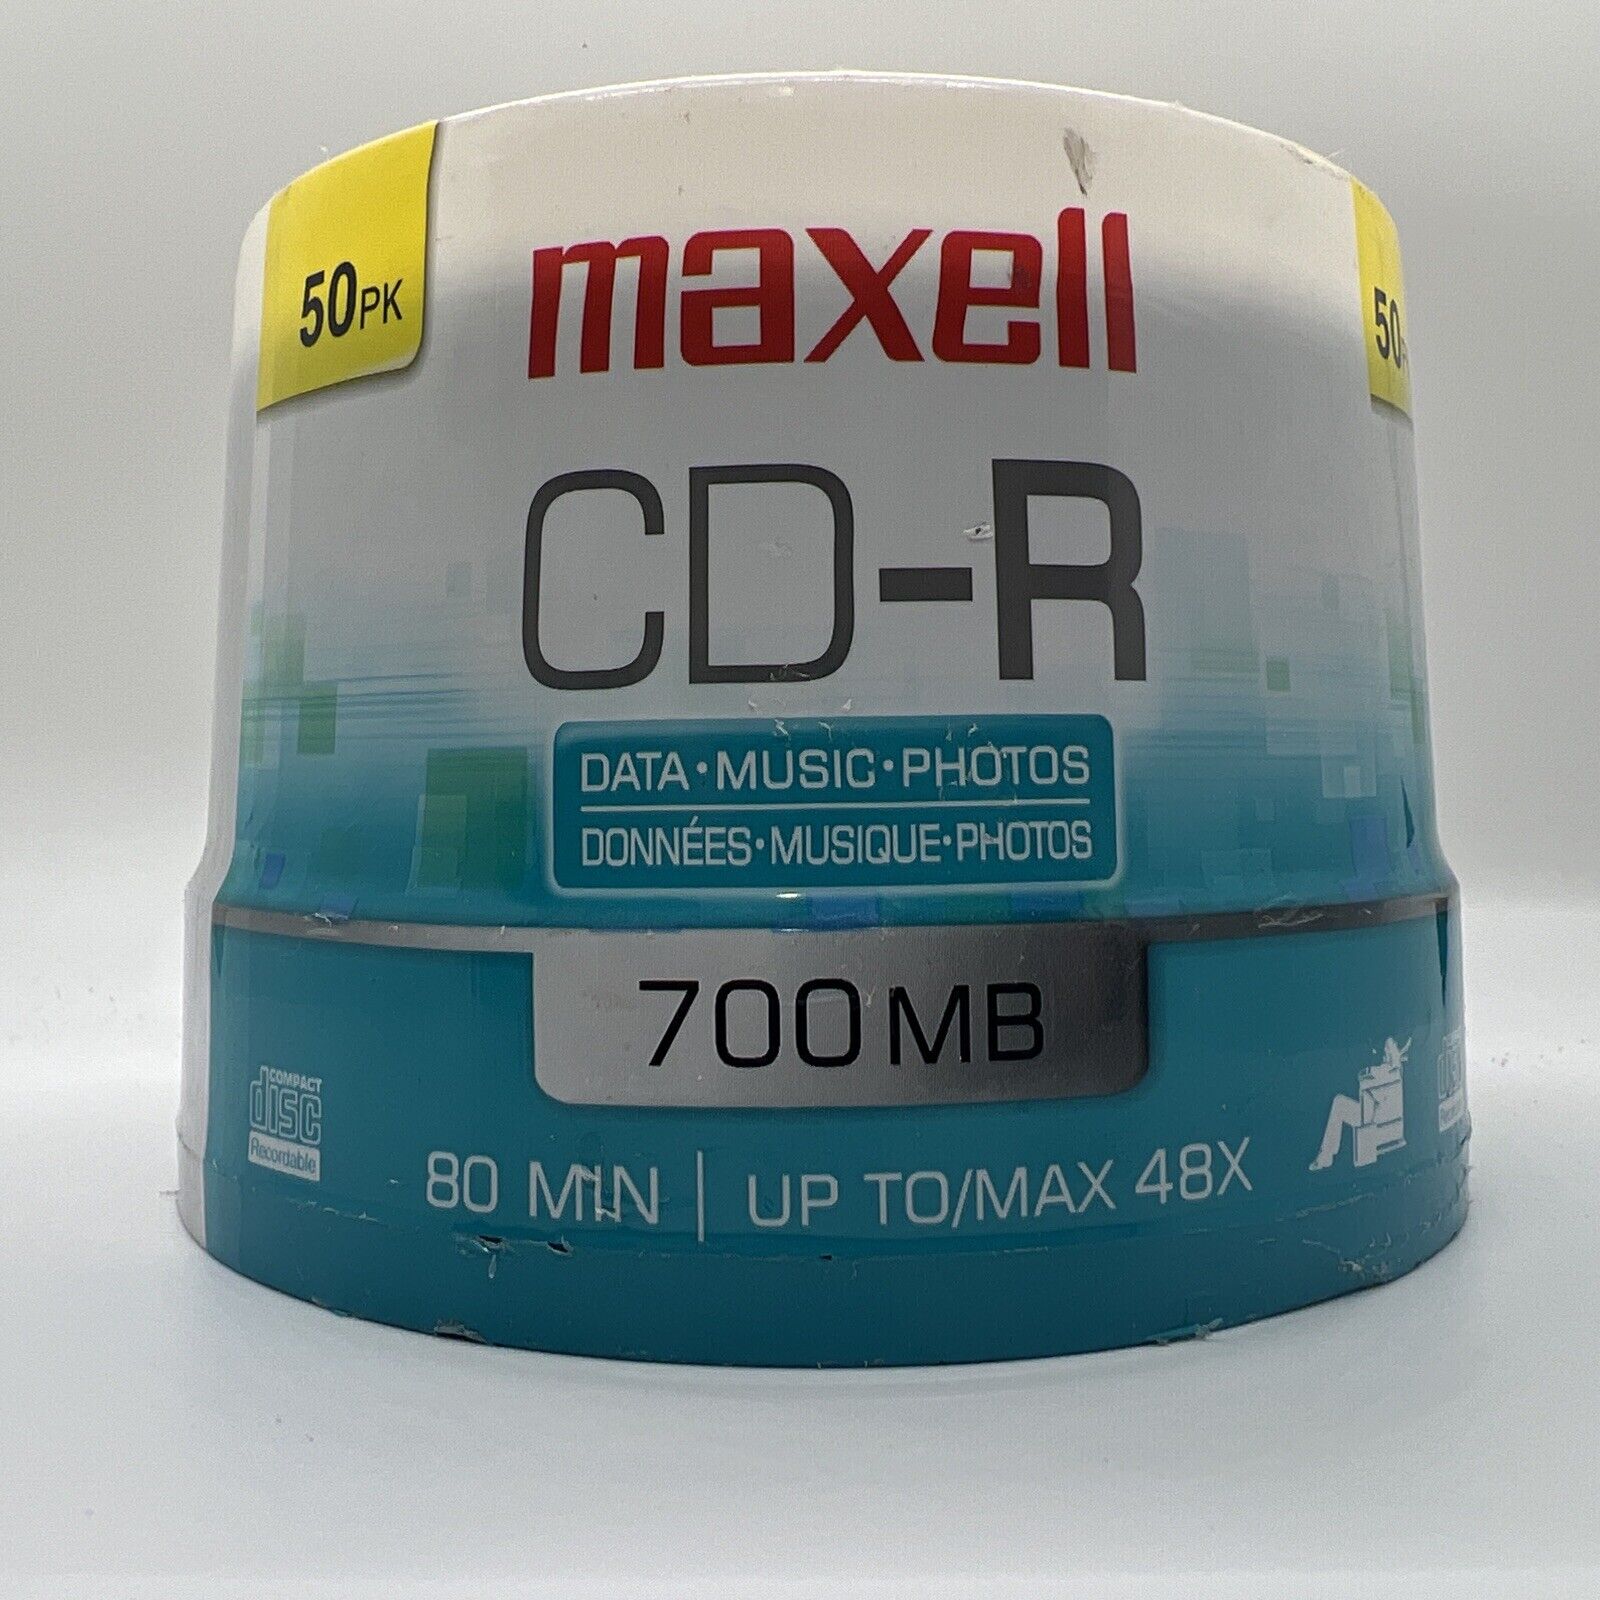 New Maxell Color CD-R 50 Pack 700 MB 80 Min Max 48X Data Music Photos L11